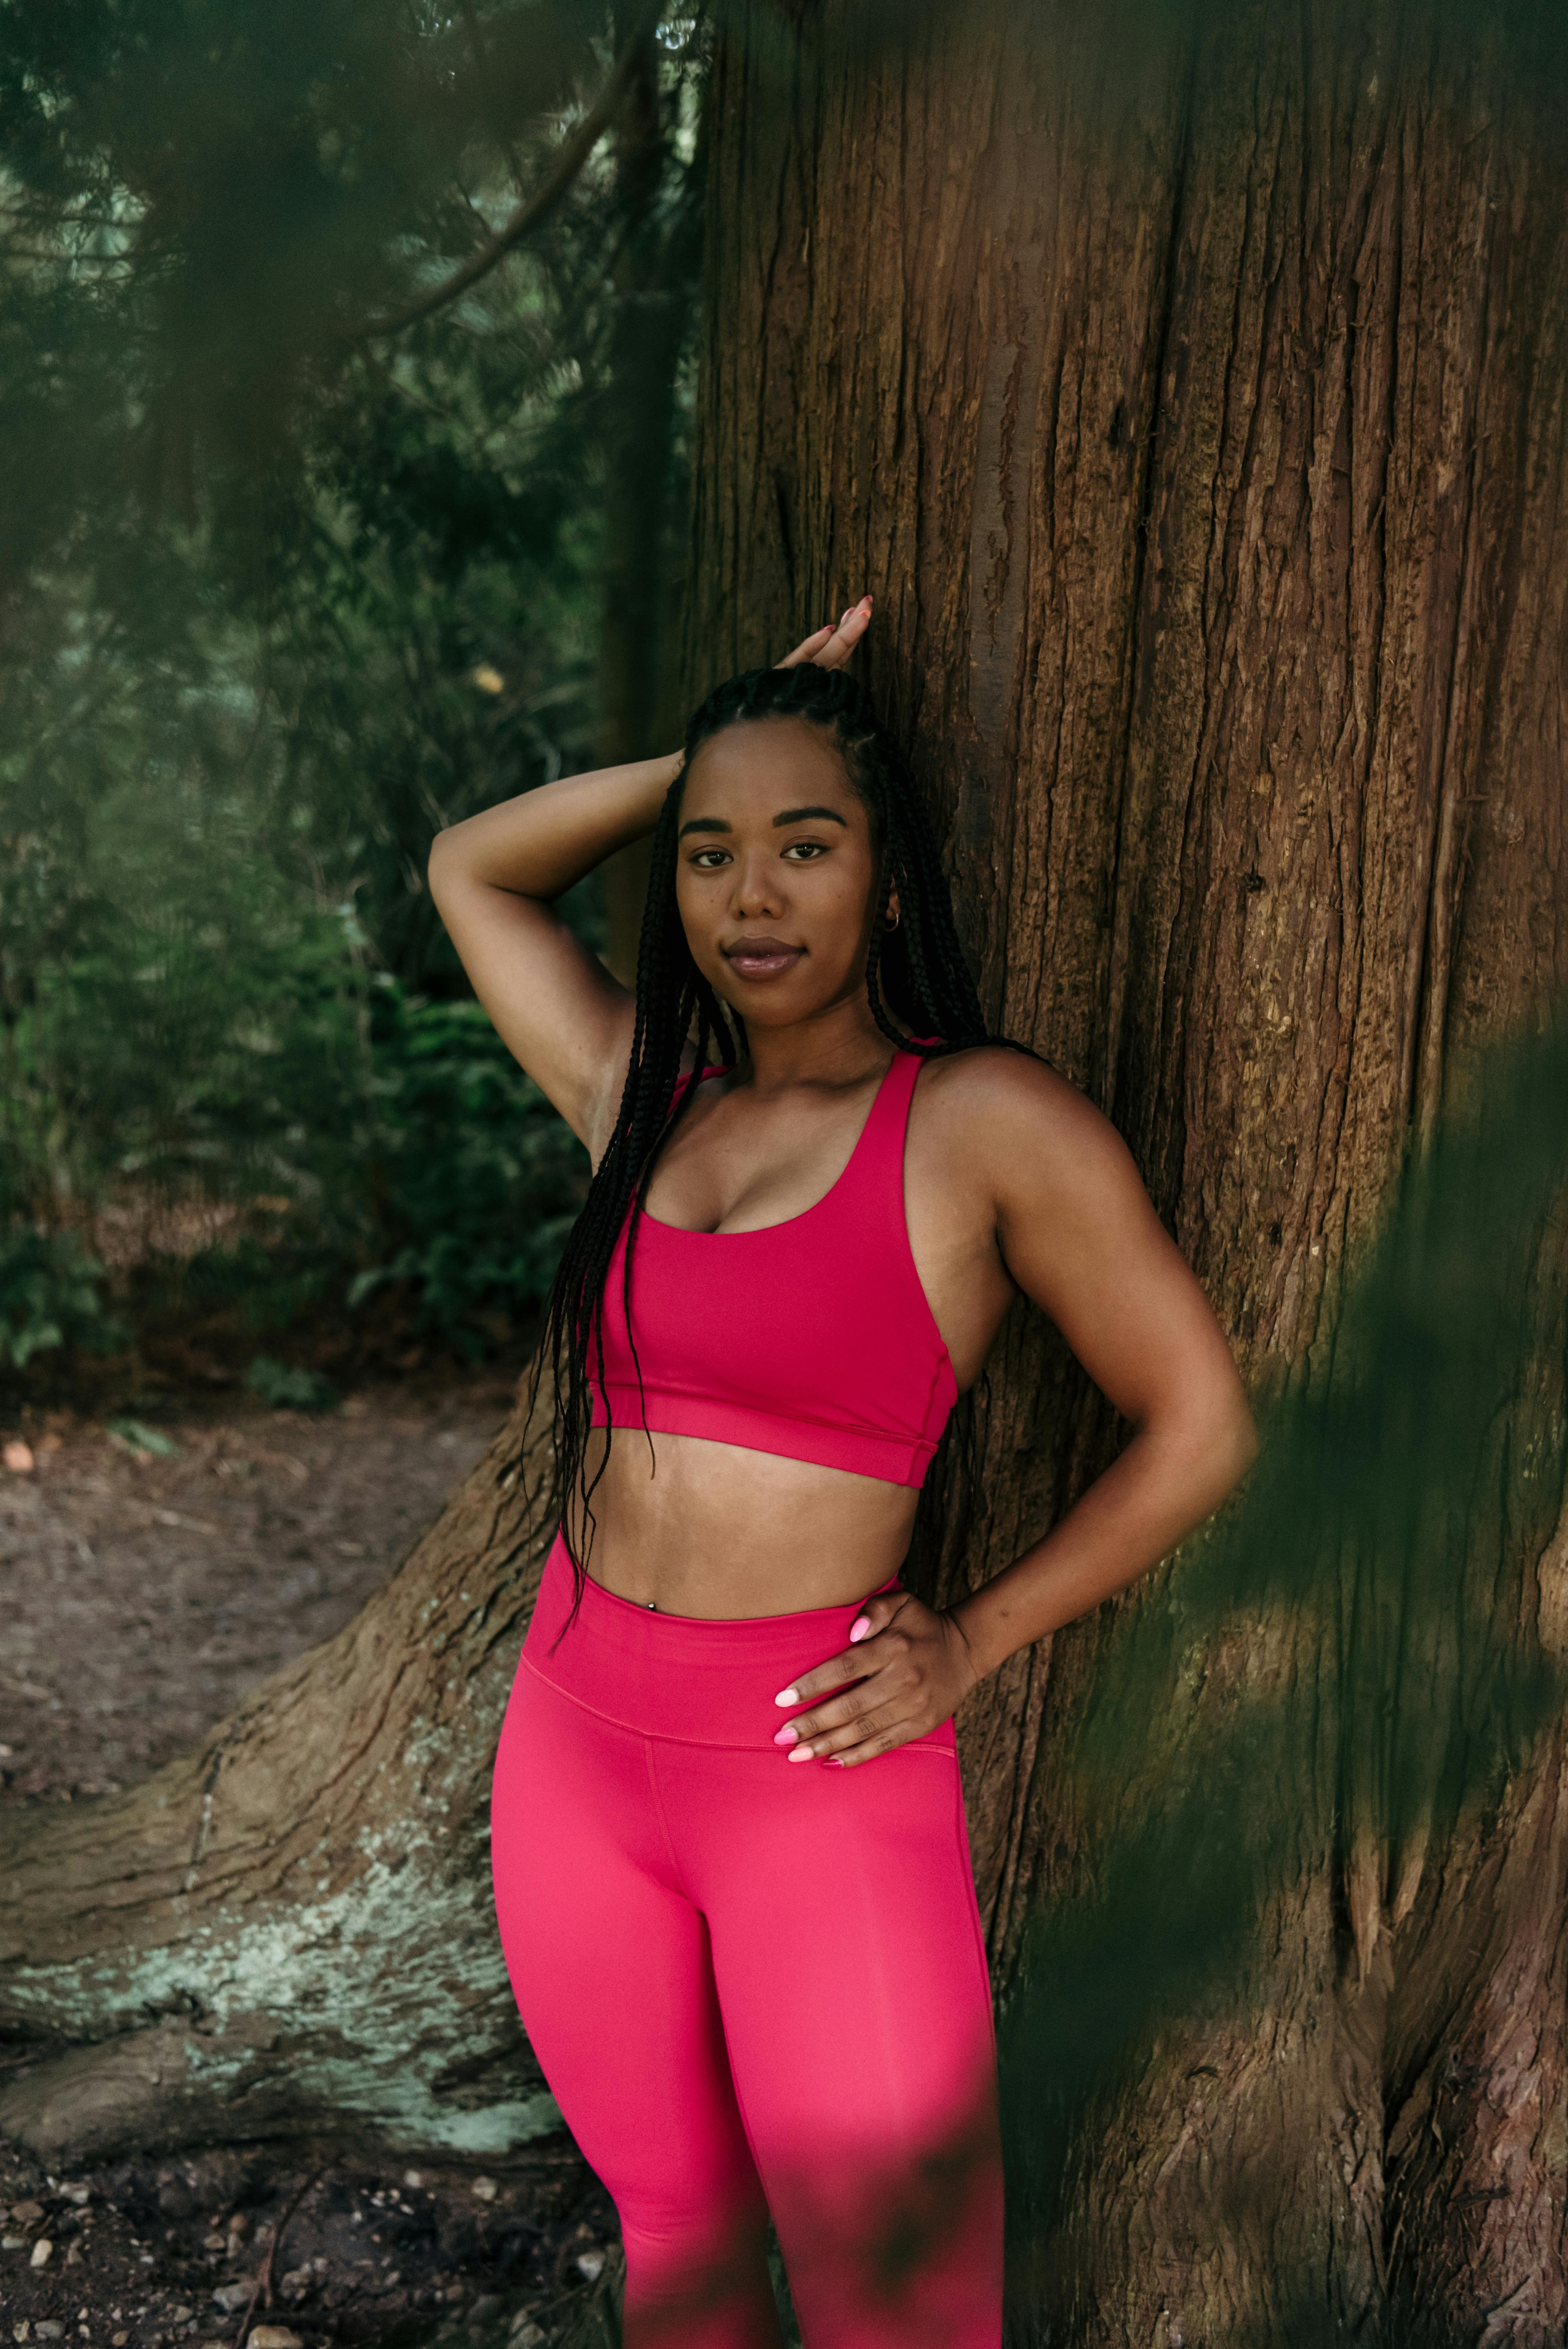 A Woman Wearing a Pink Activewear · Free Stock Photo